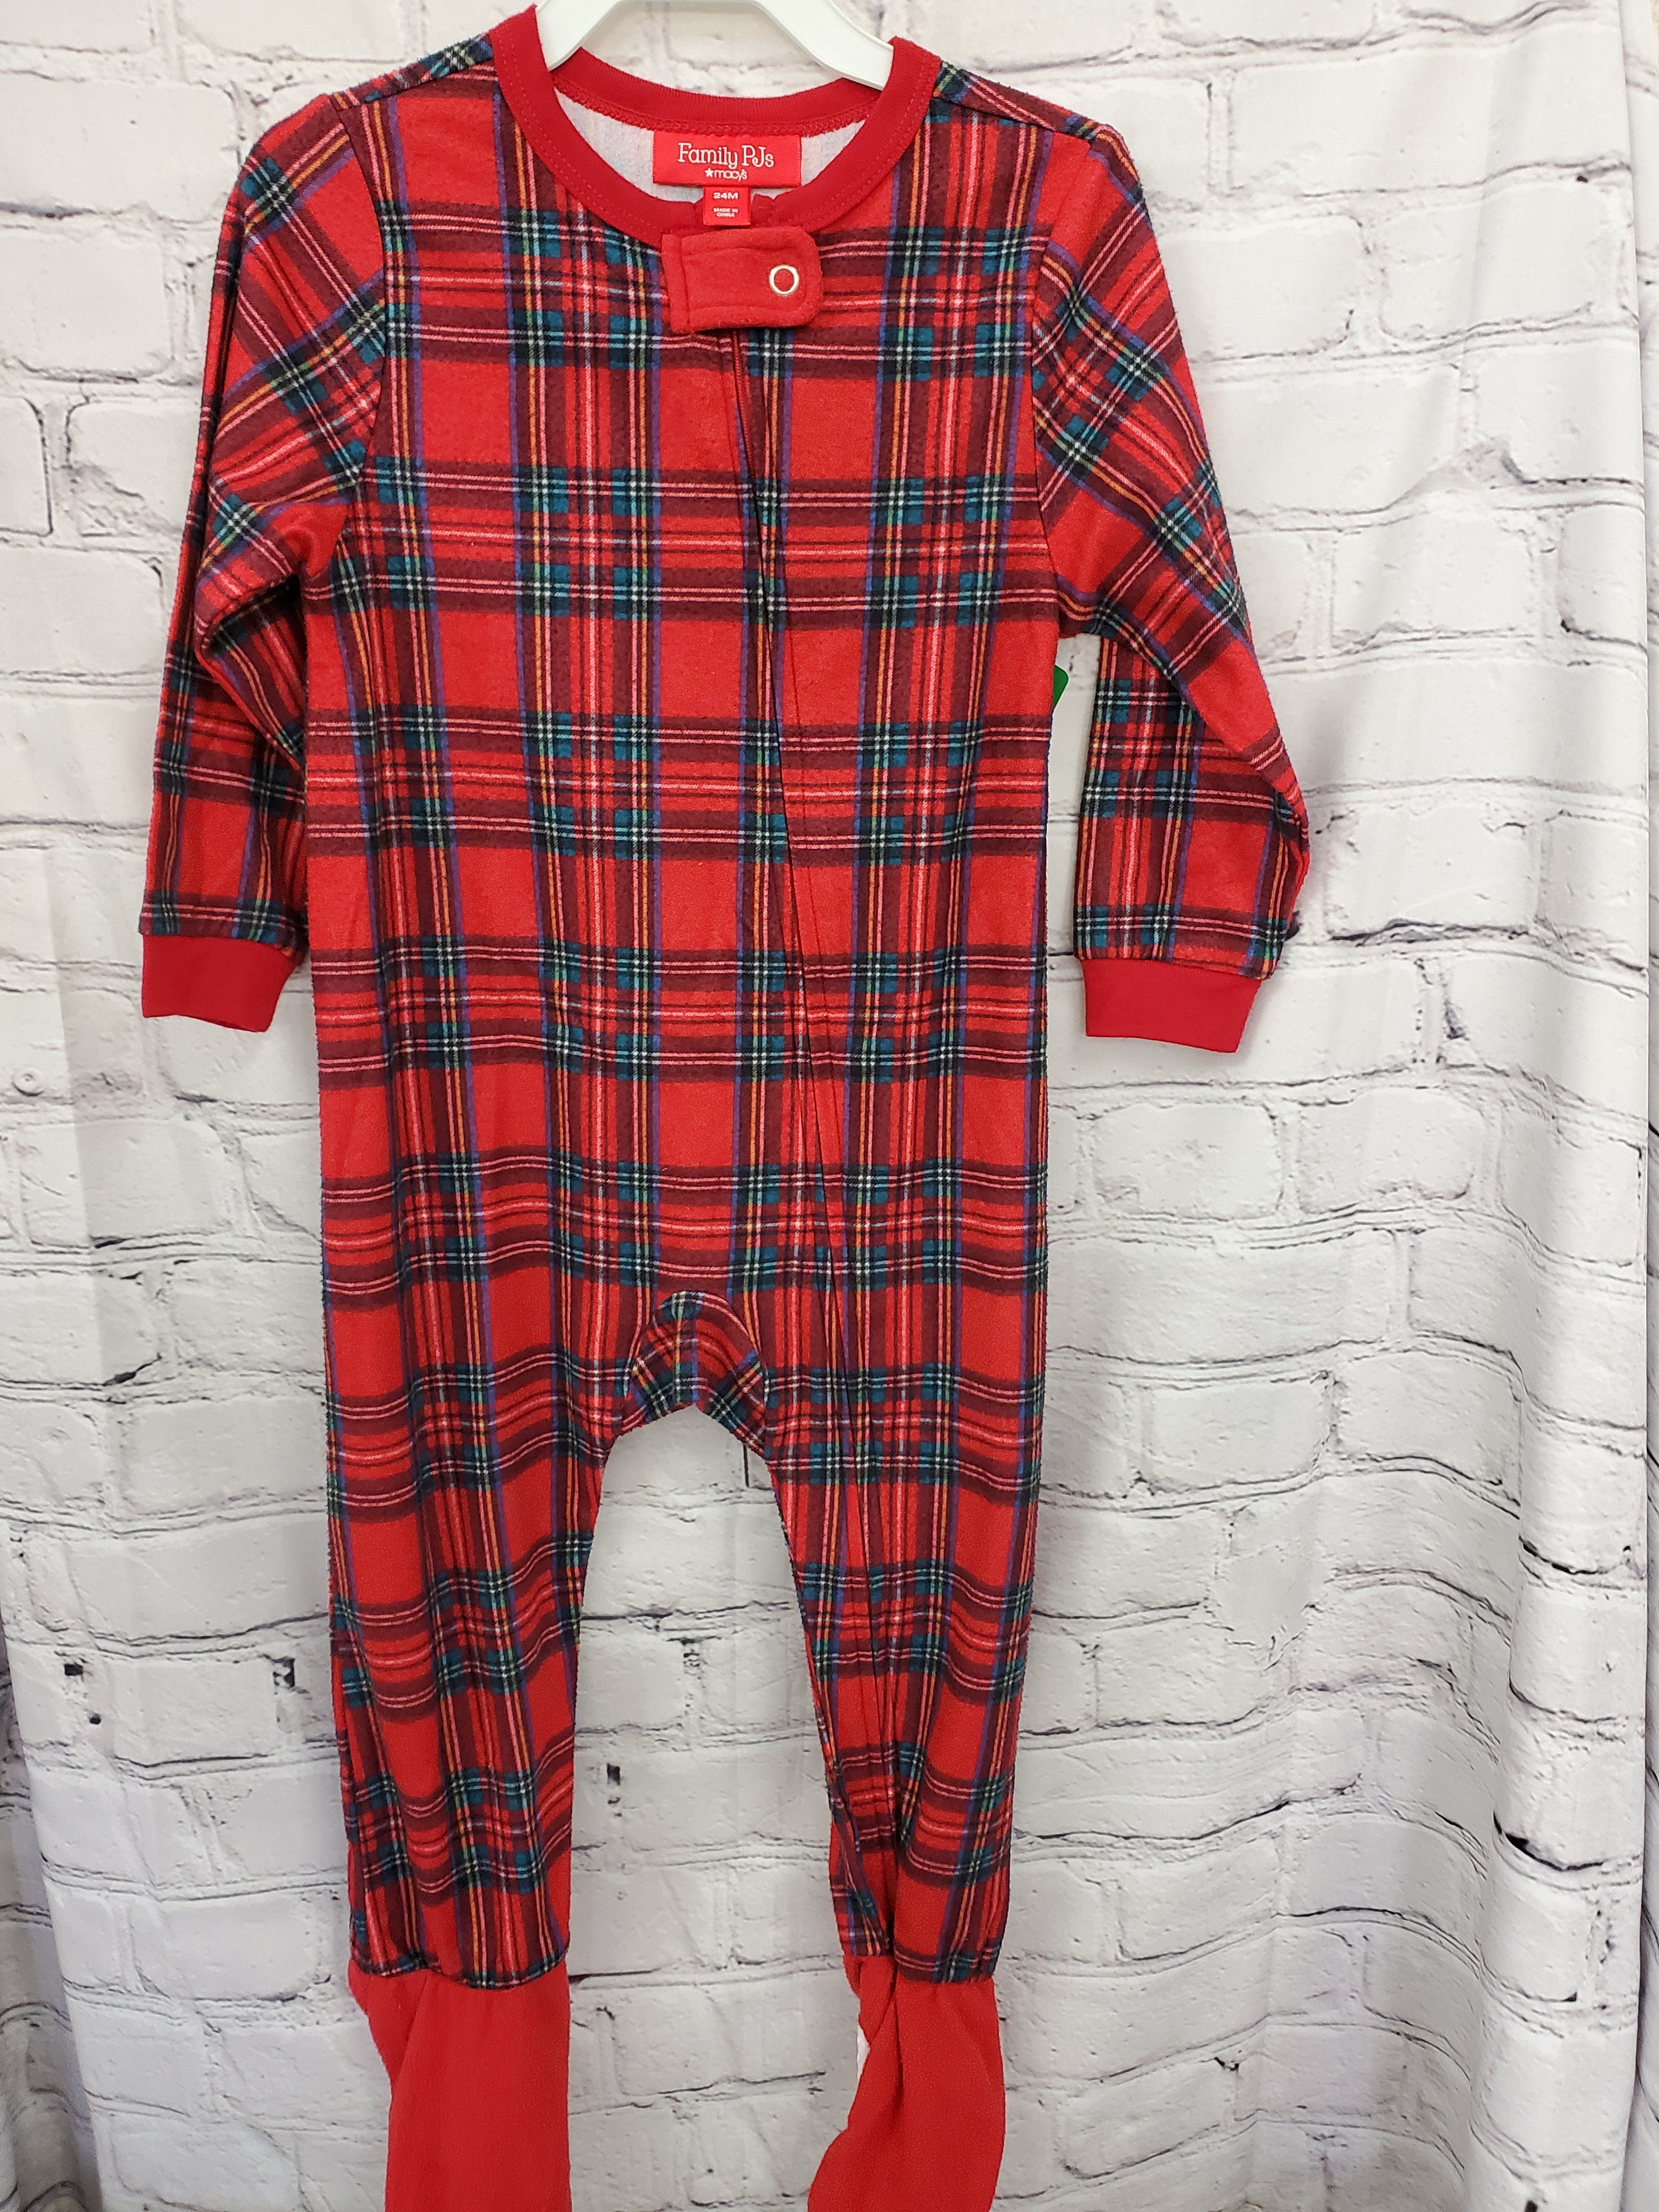 Macy's boys/girls family pjs red plaid footed 24m